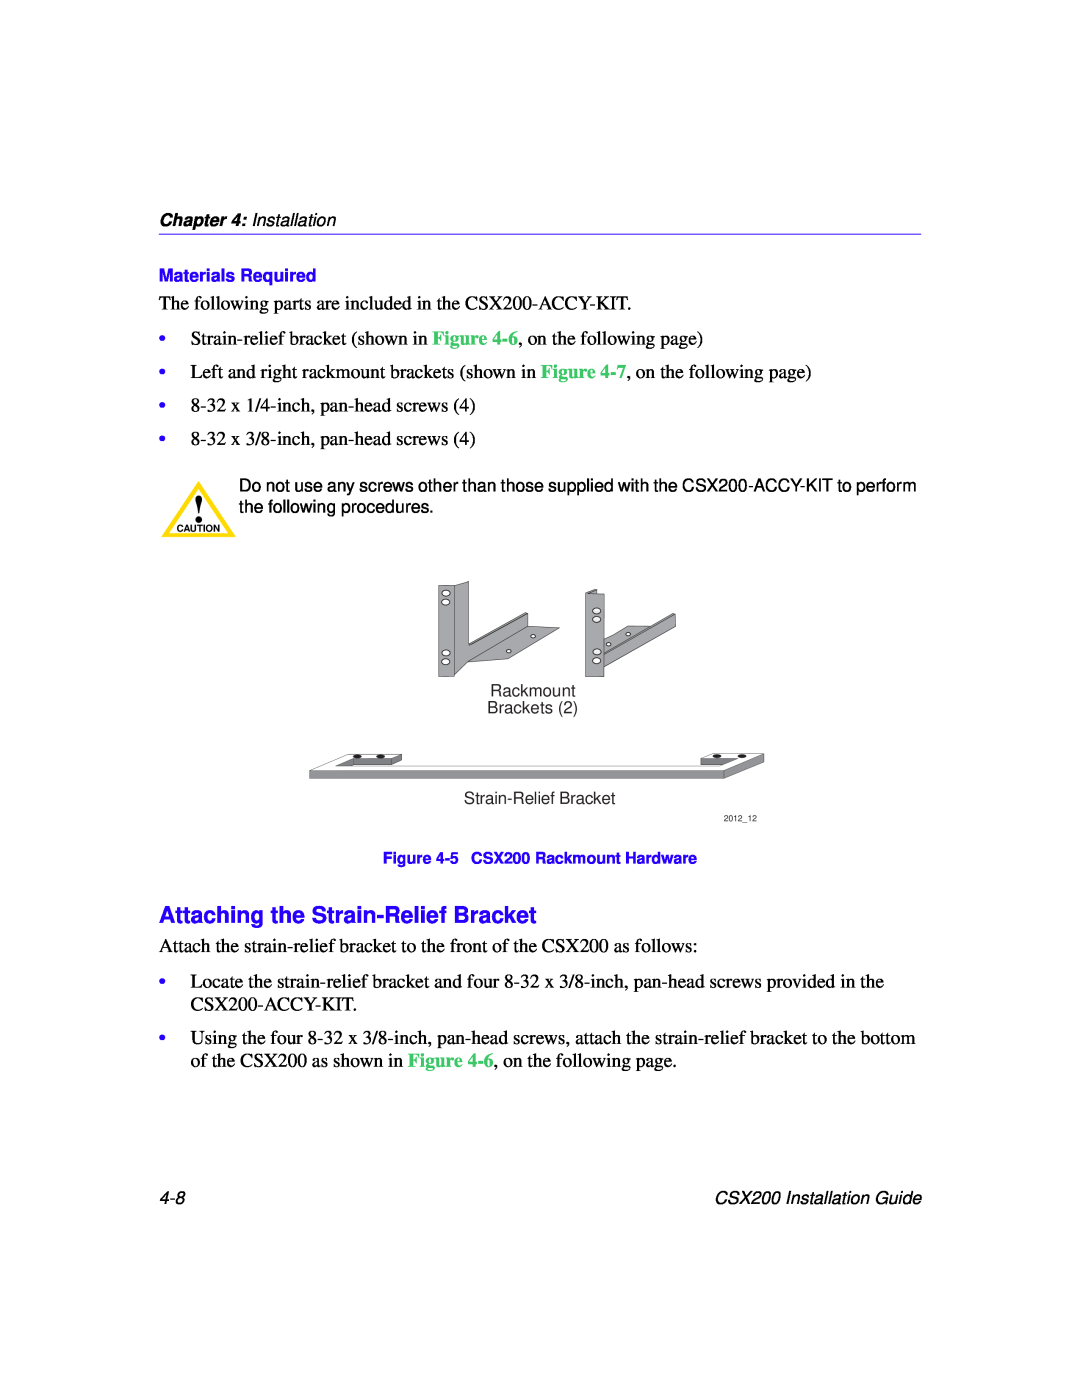 Cabletron Systems CSX200 manual Attaching the Strain-Relief Bracket 